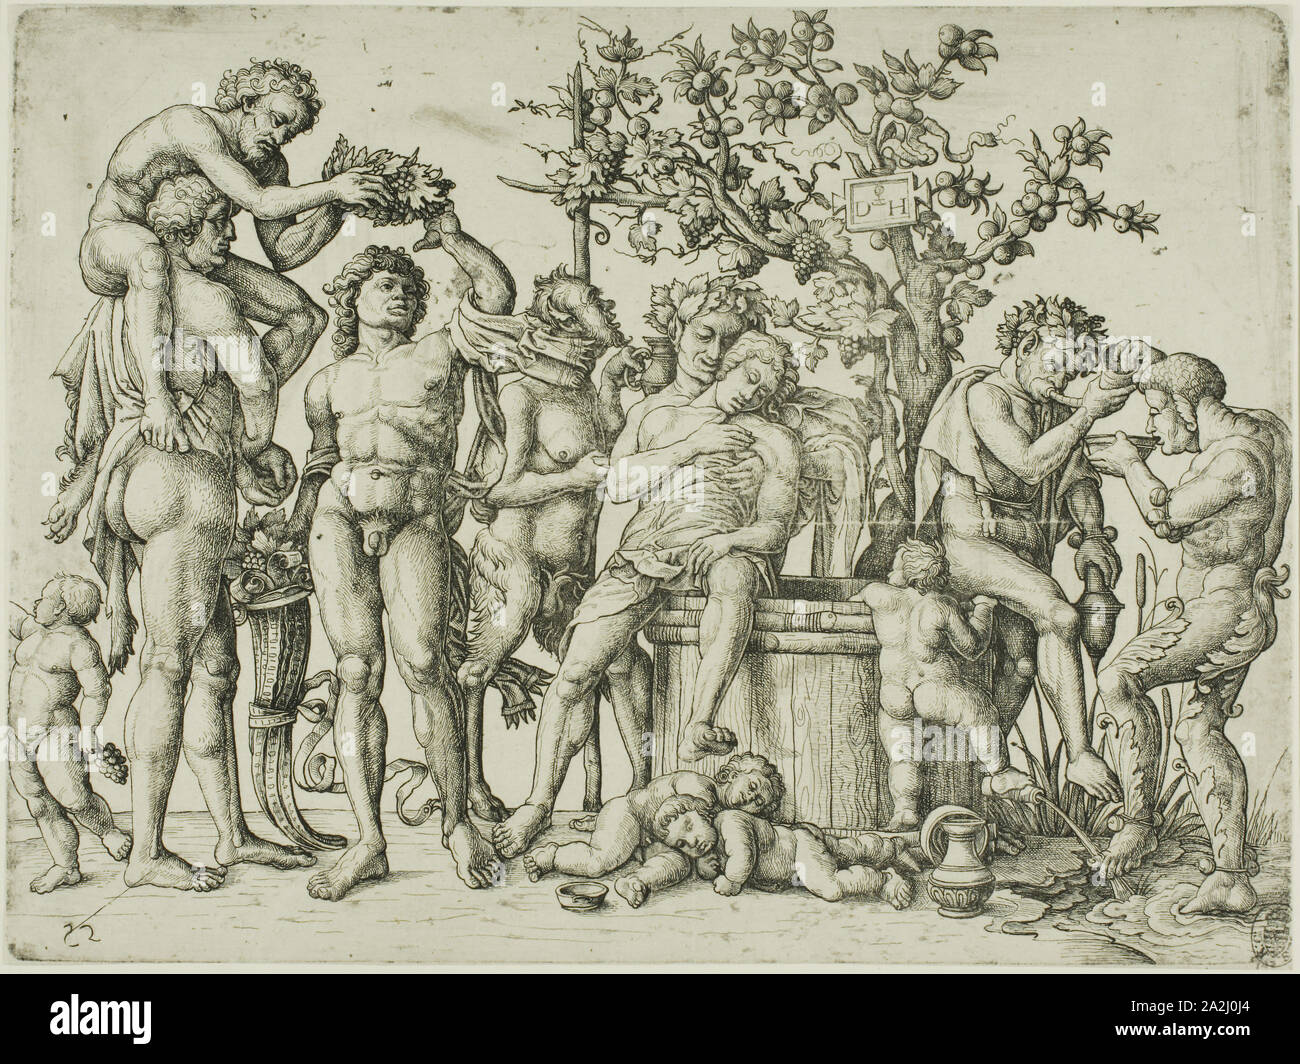 The Triumph of Bacchus, 1528, Daniel Hopfer, I, German, 1470-1536, Germany, Etching on ivory laid paper, 214 x 285 mm Stock Photo